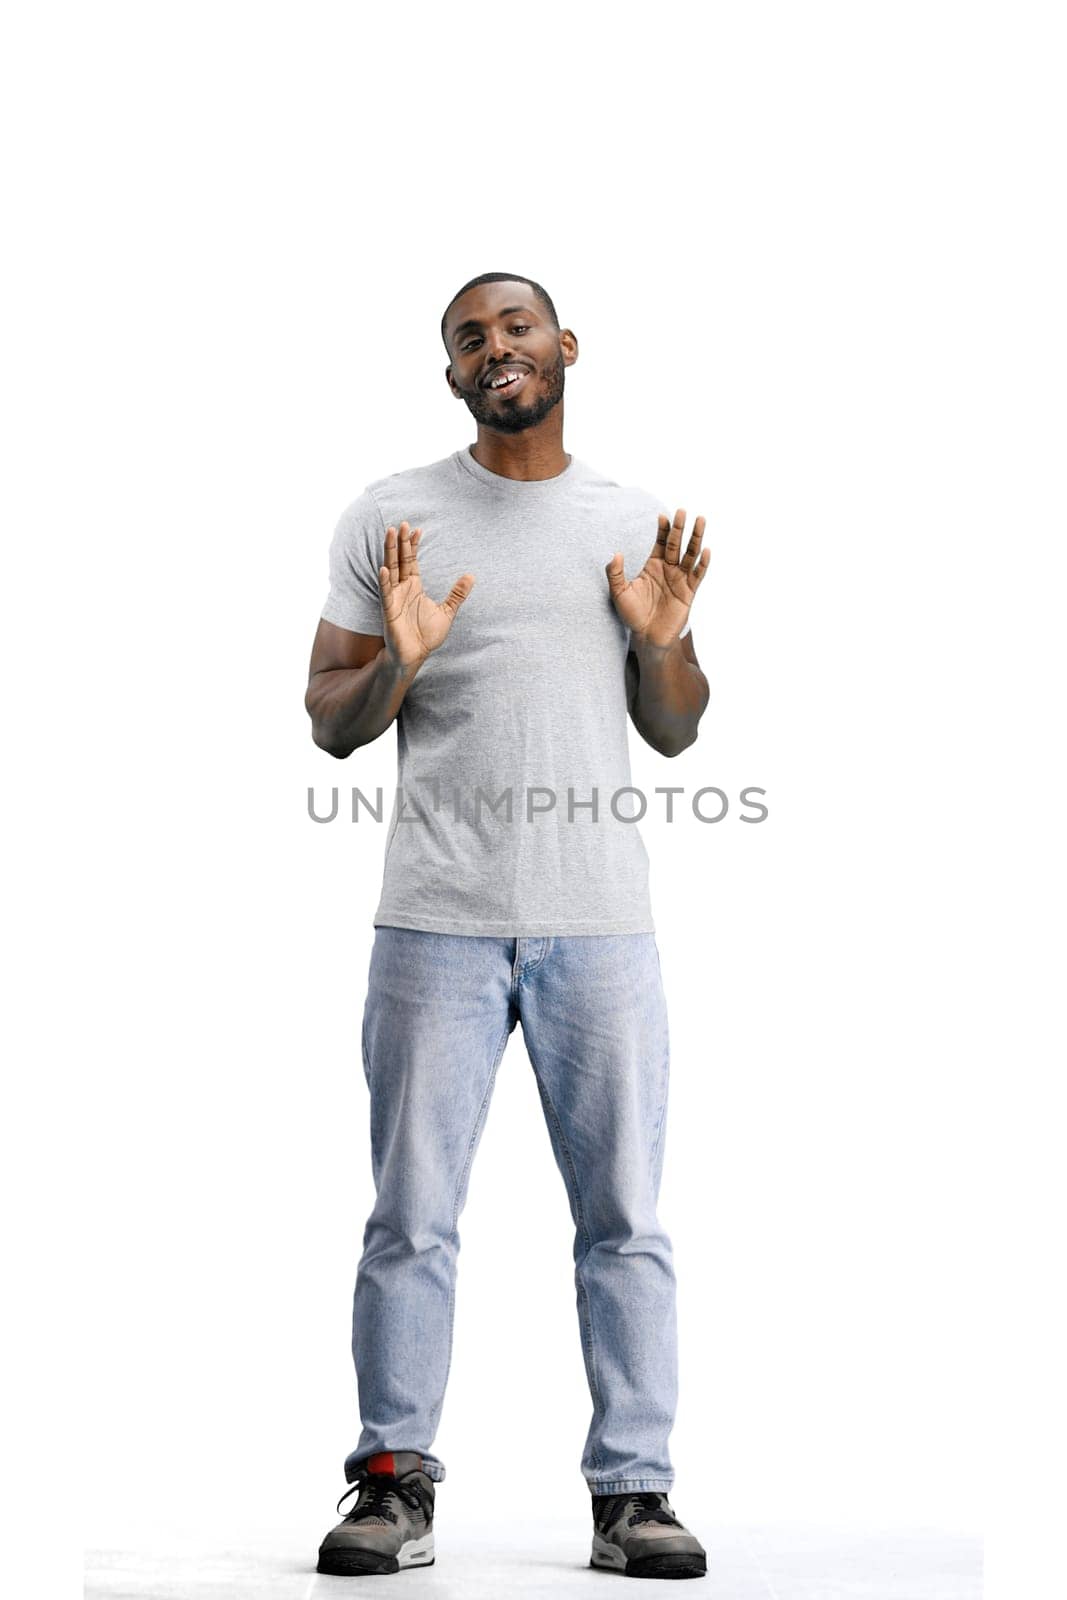 A man, full-length, on a white background, raises his hands.